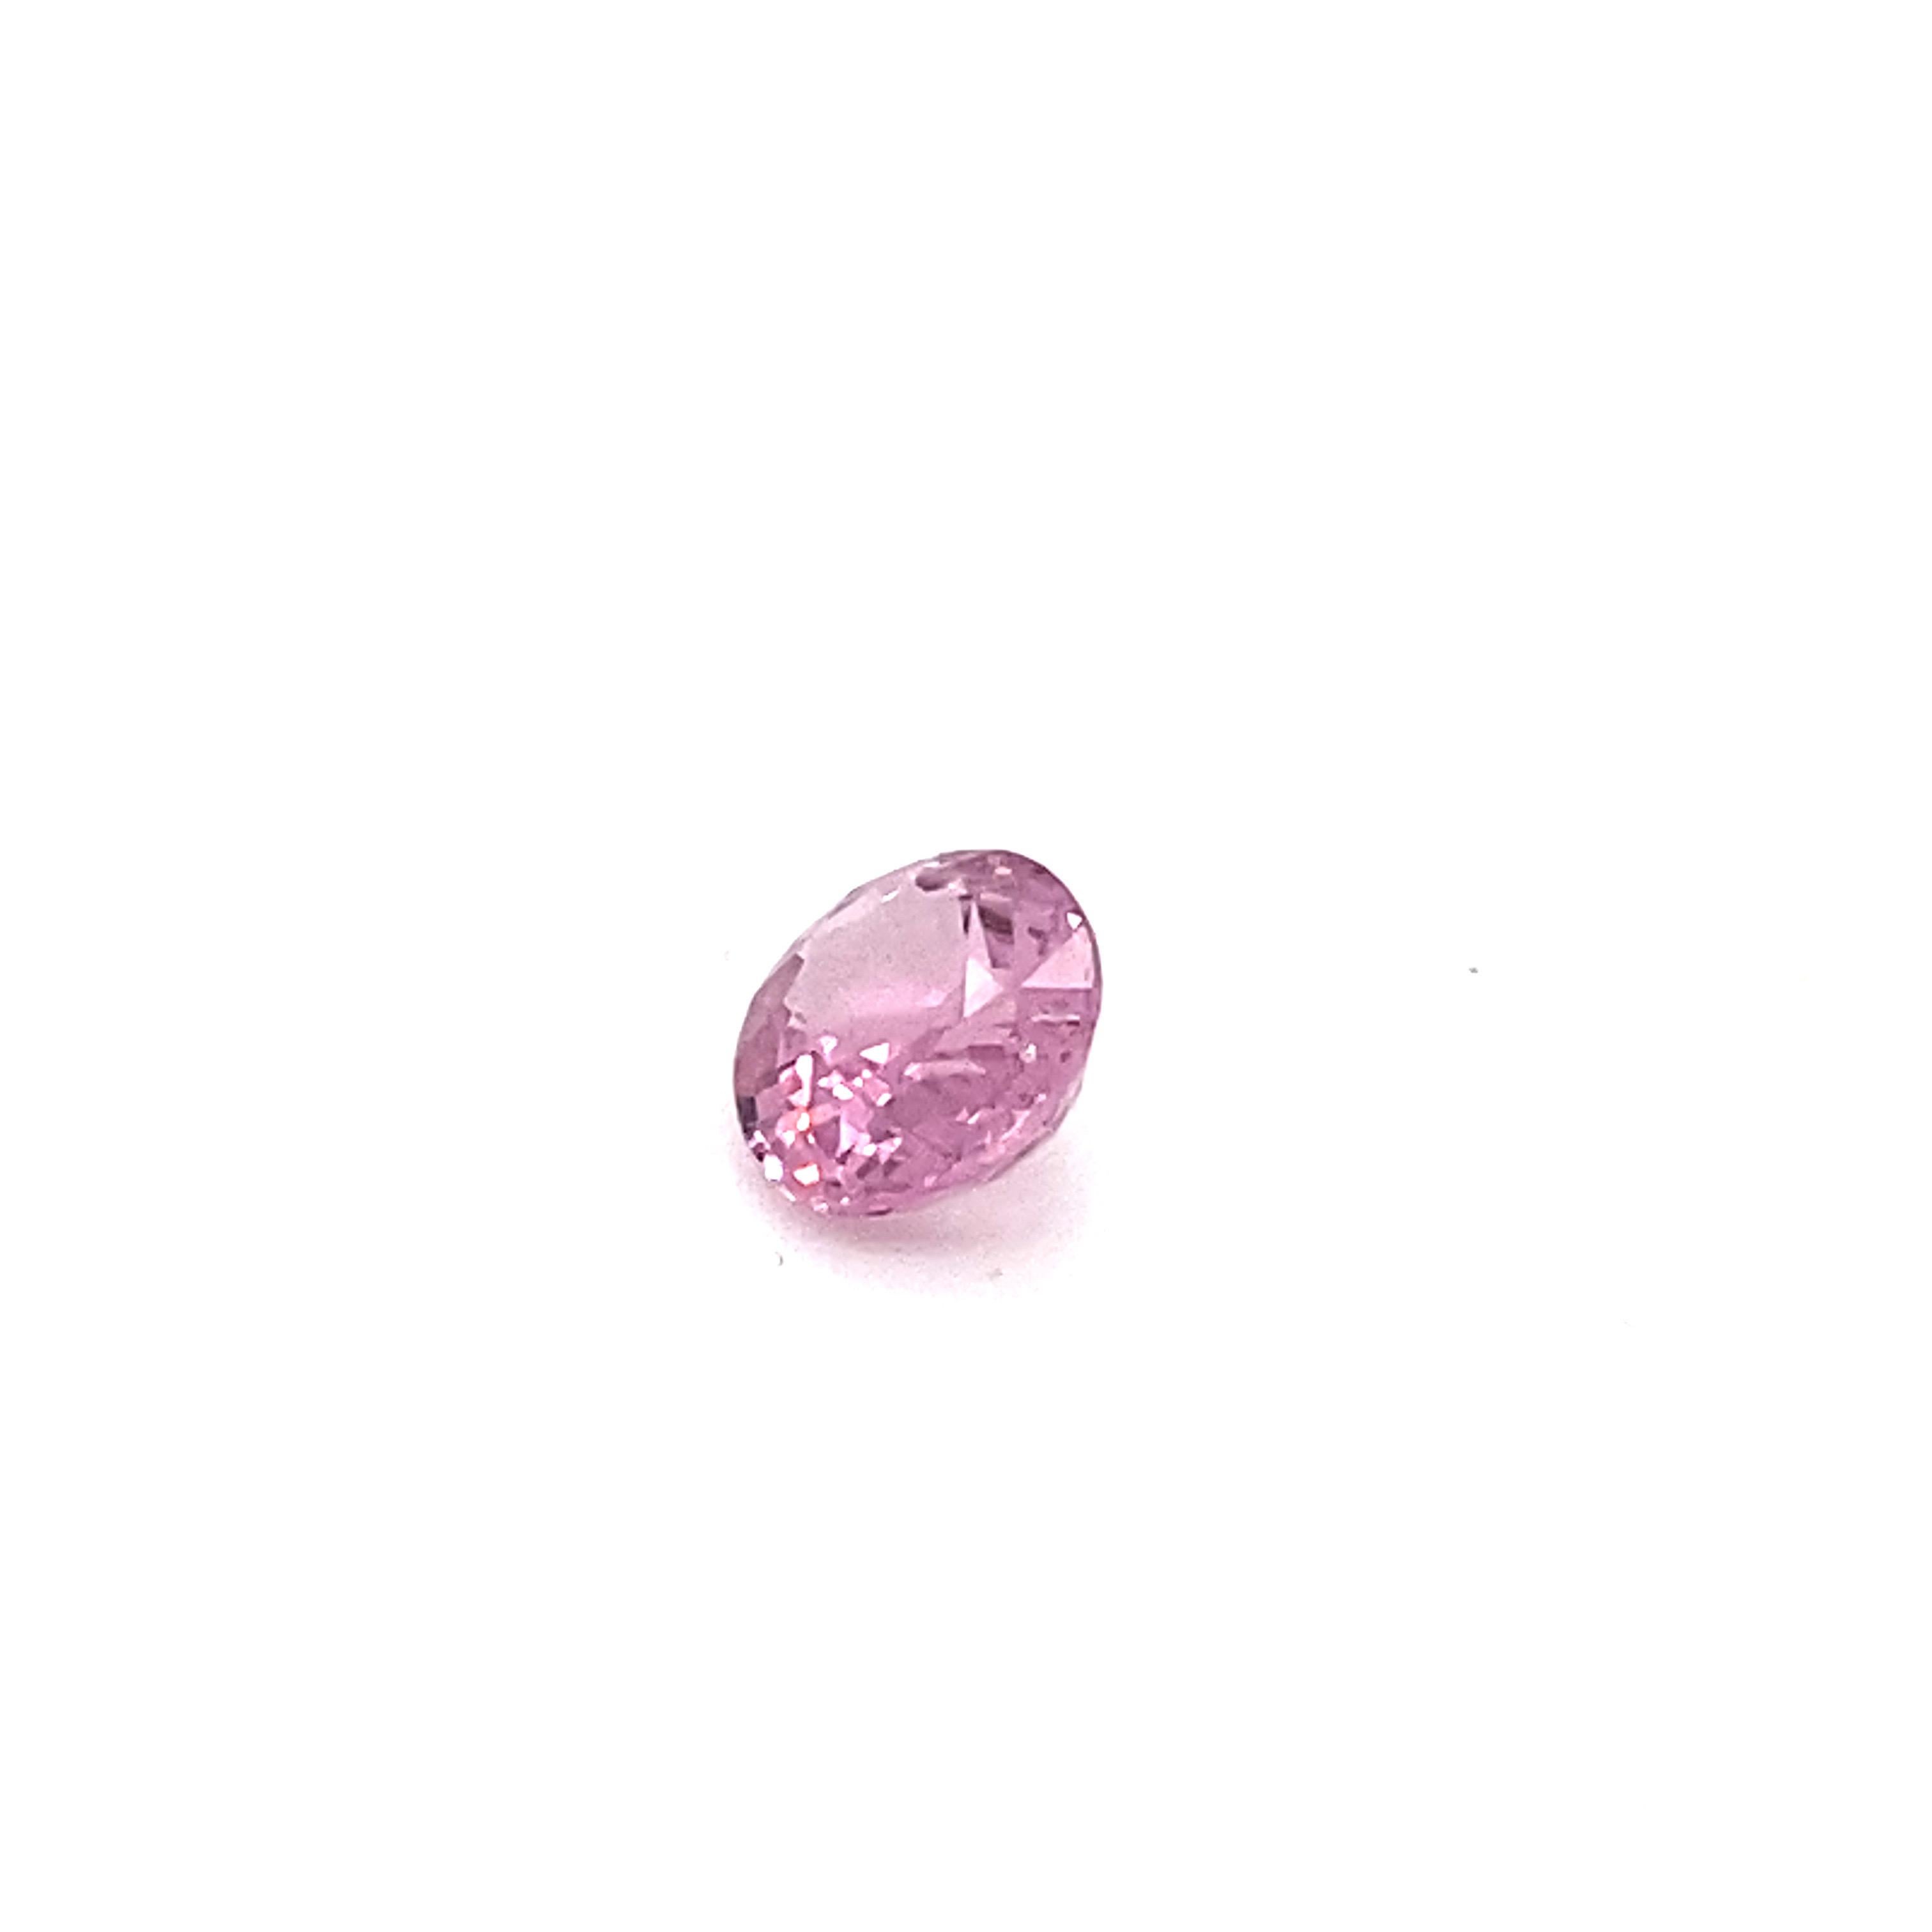 Contemporary 2.0 Carat Oval Shape Natural Pink Spinel Loose Gemstone For Sale